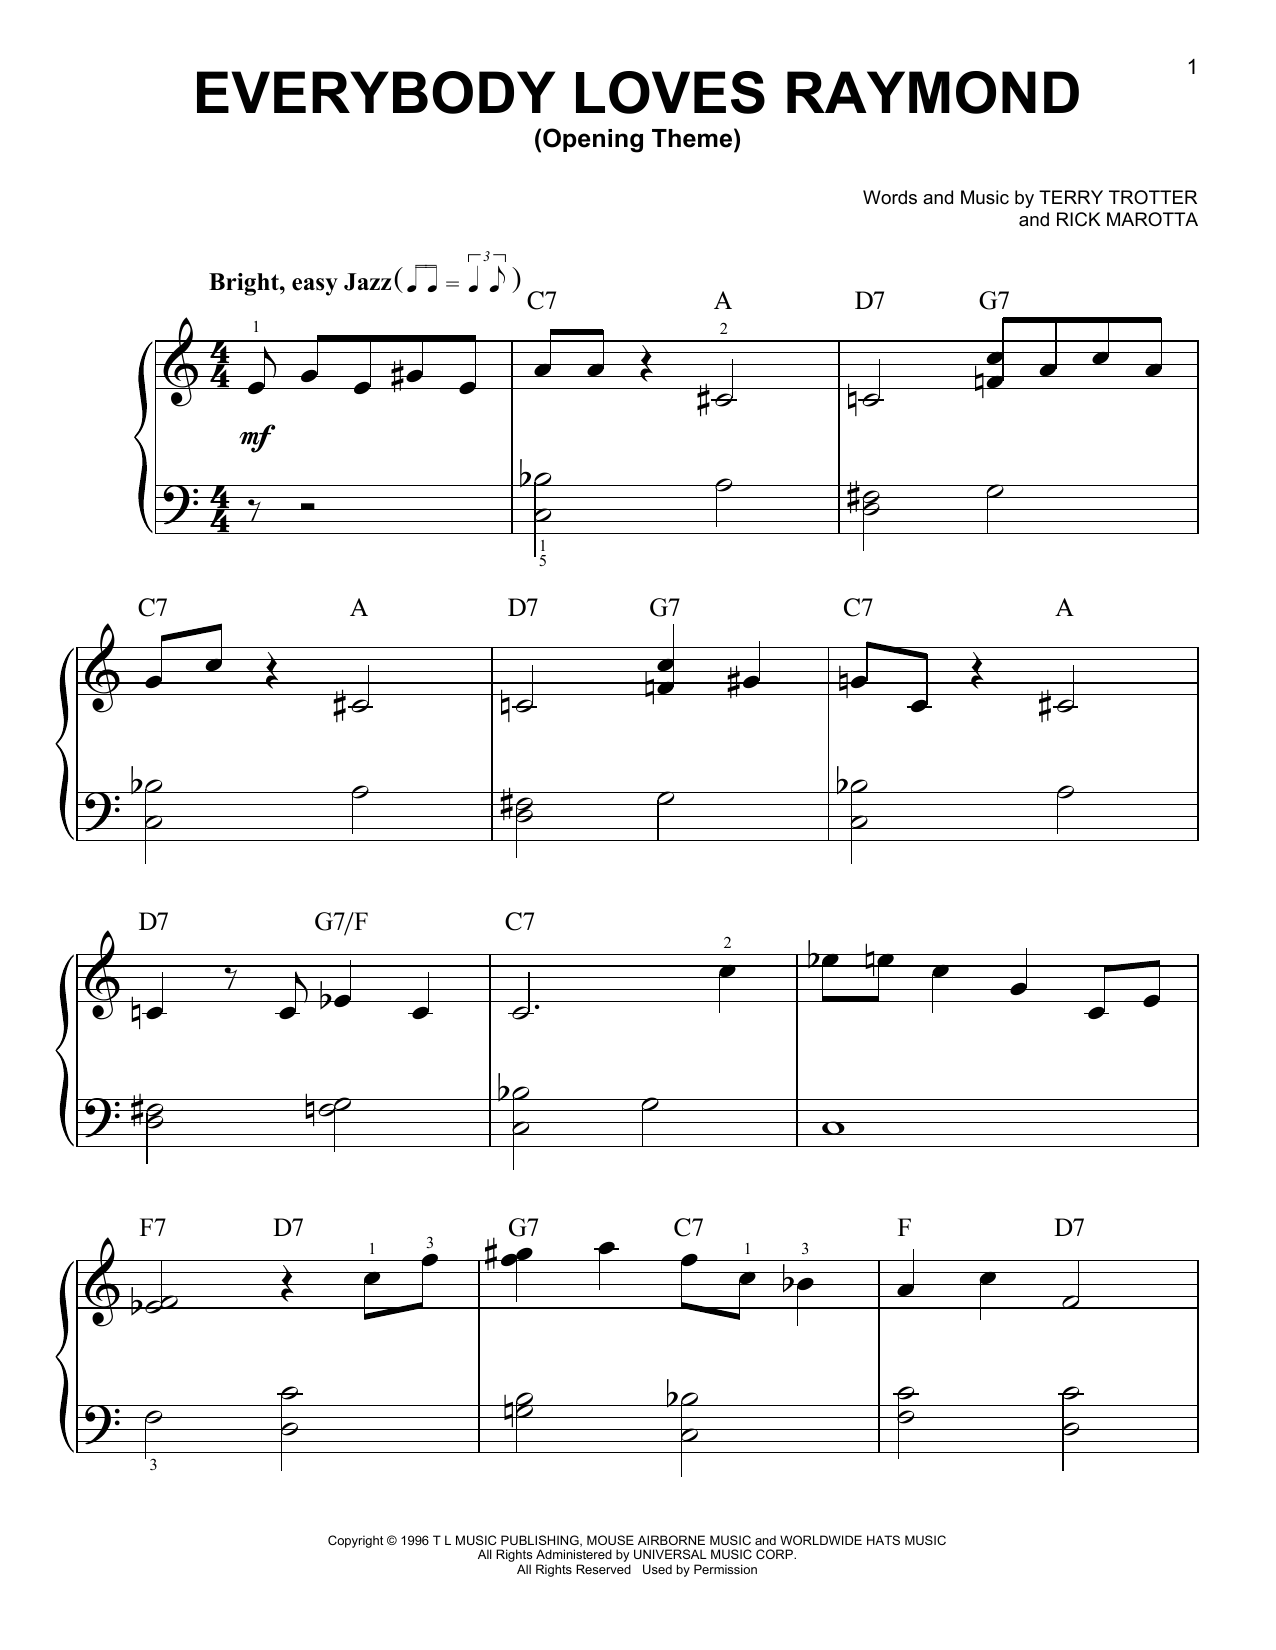 Download Terry Trotter and Rick Marotta Everybody Loves Raymond (Opening Theme) Sheet Music